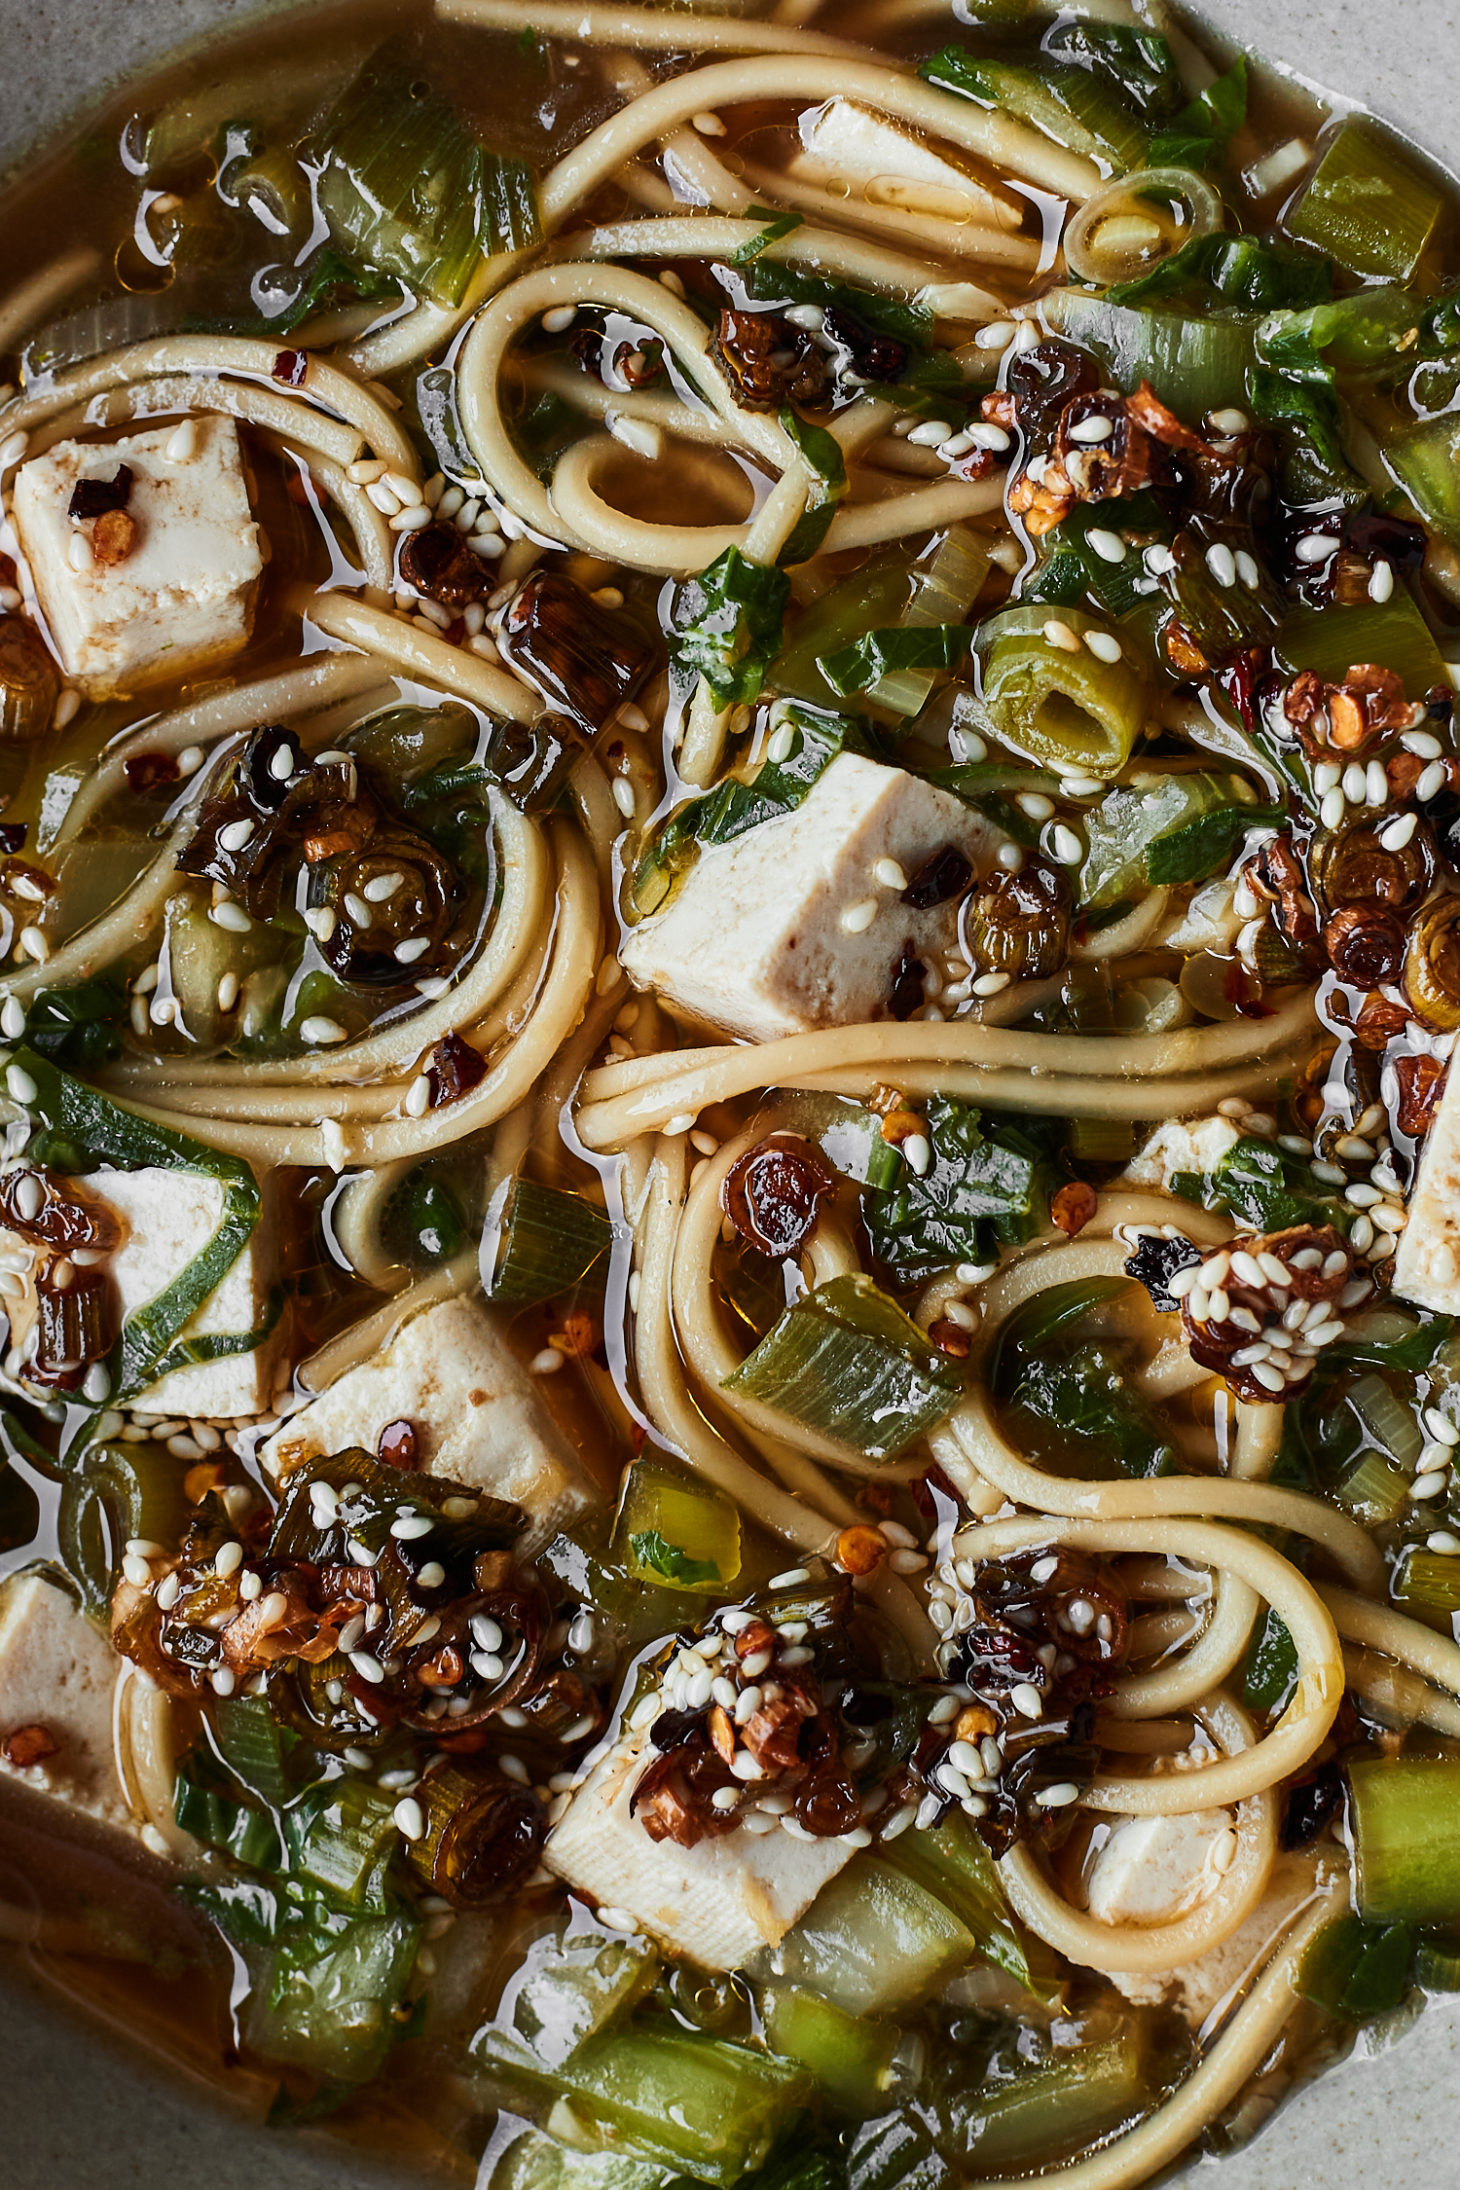 Close-up image of noodles and tofu in a tan broth, scallions, and bok choy